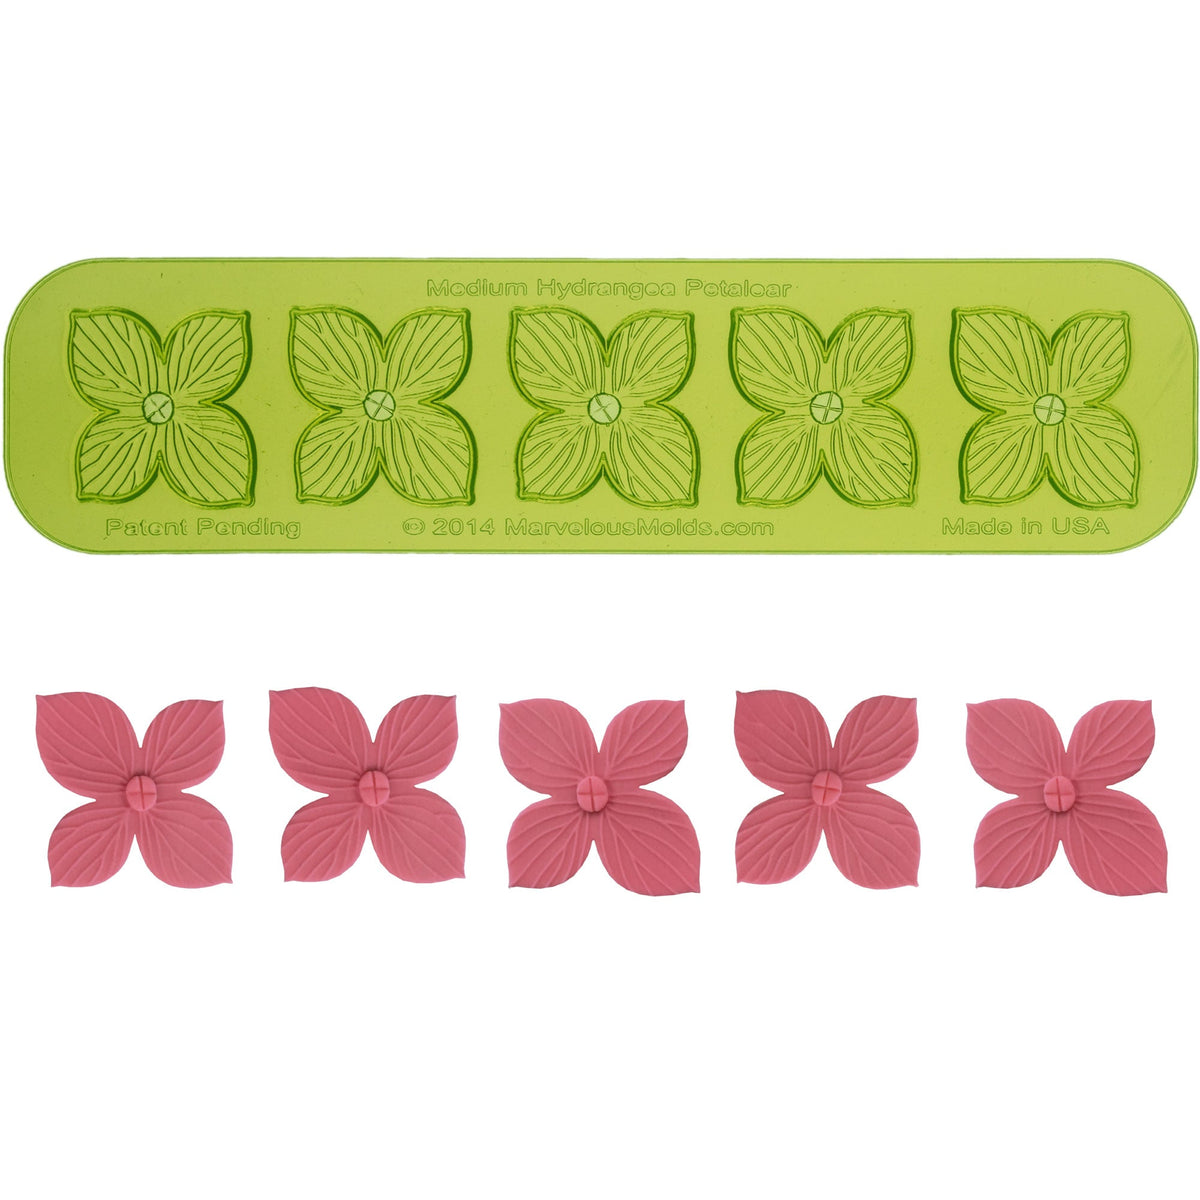 Medium Hydrangea Petalear Silicone Floral Veiner Mold for Pottery , Clay or Resin Crafts by Marvelous Molds